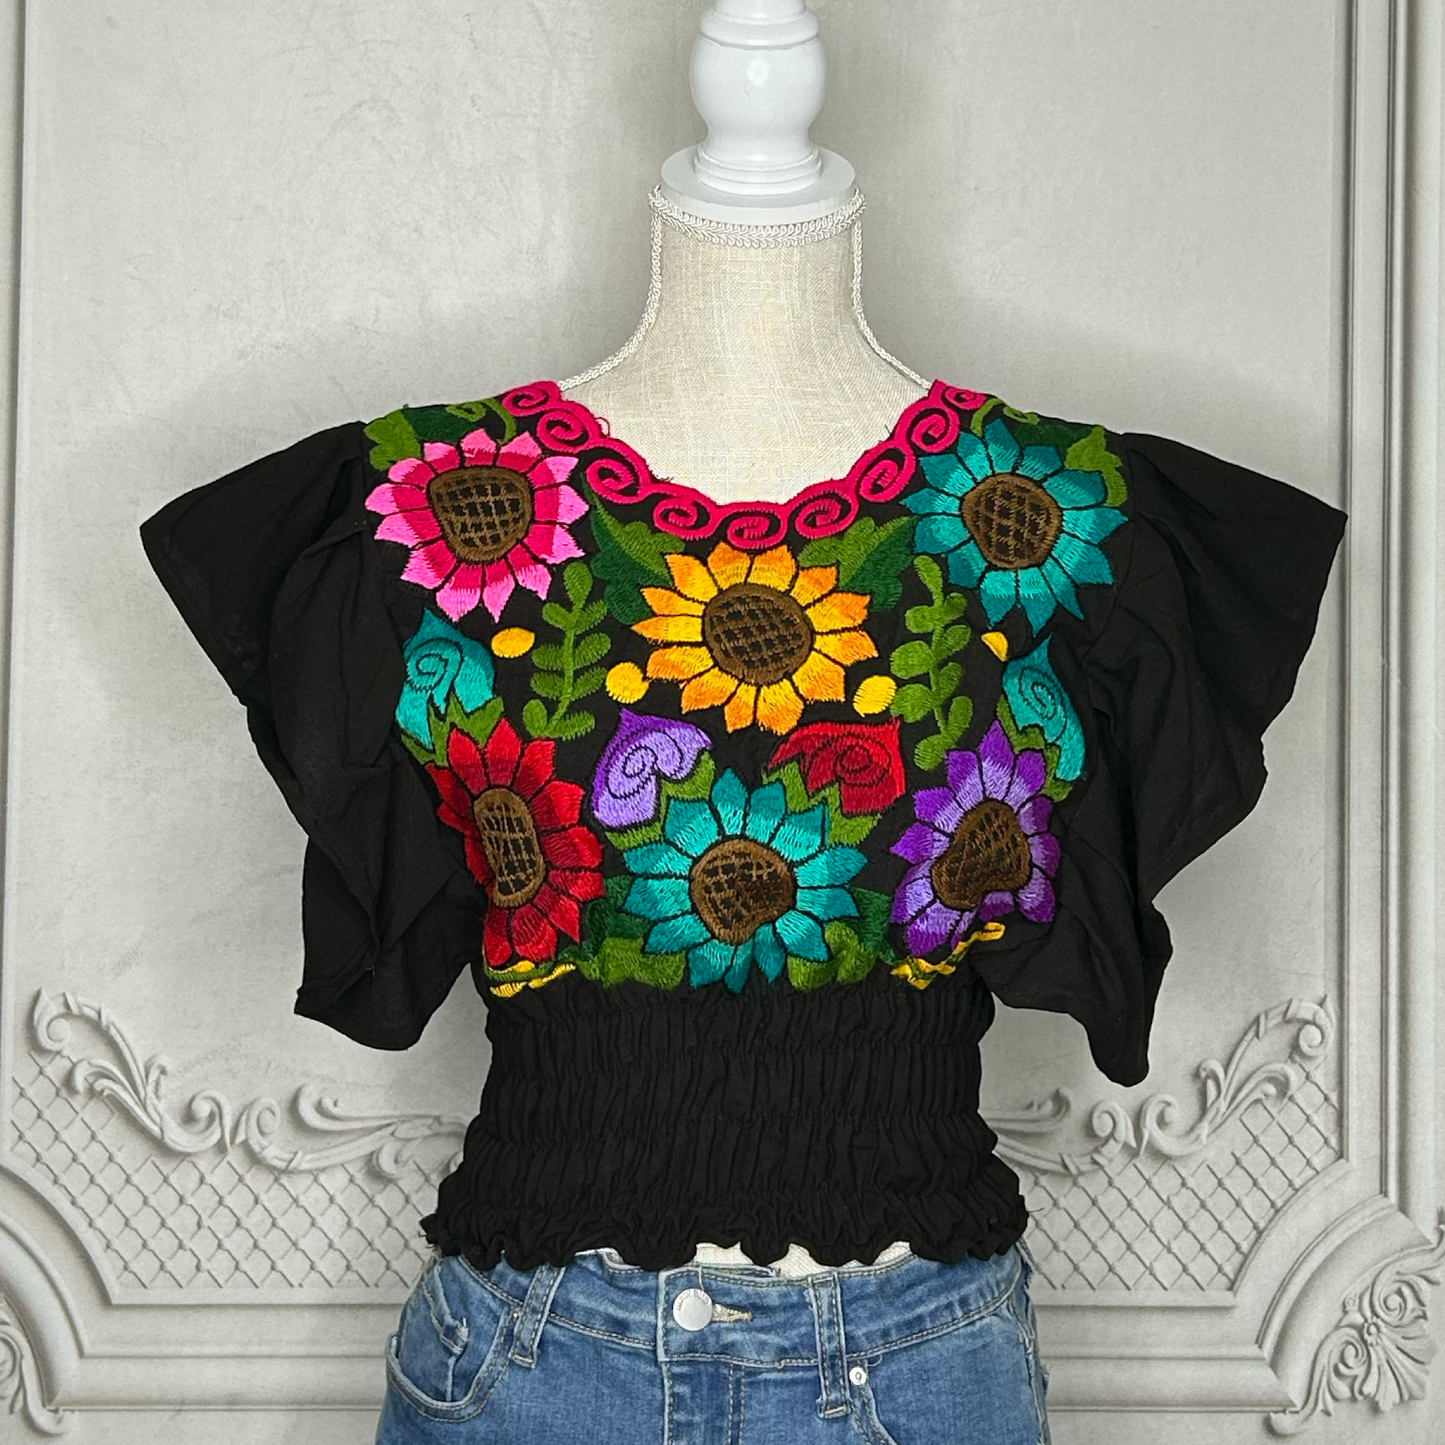 Butterfly Sleeve Mexican Crop Top Sunflower Multi